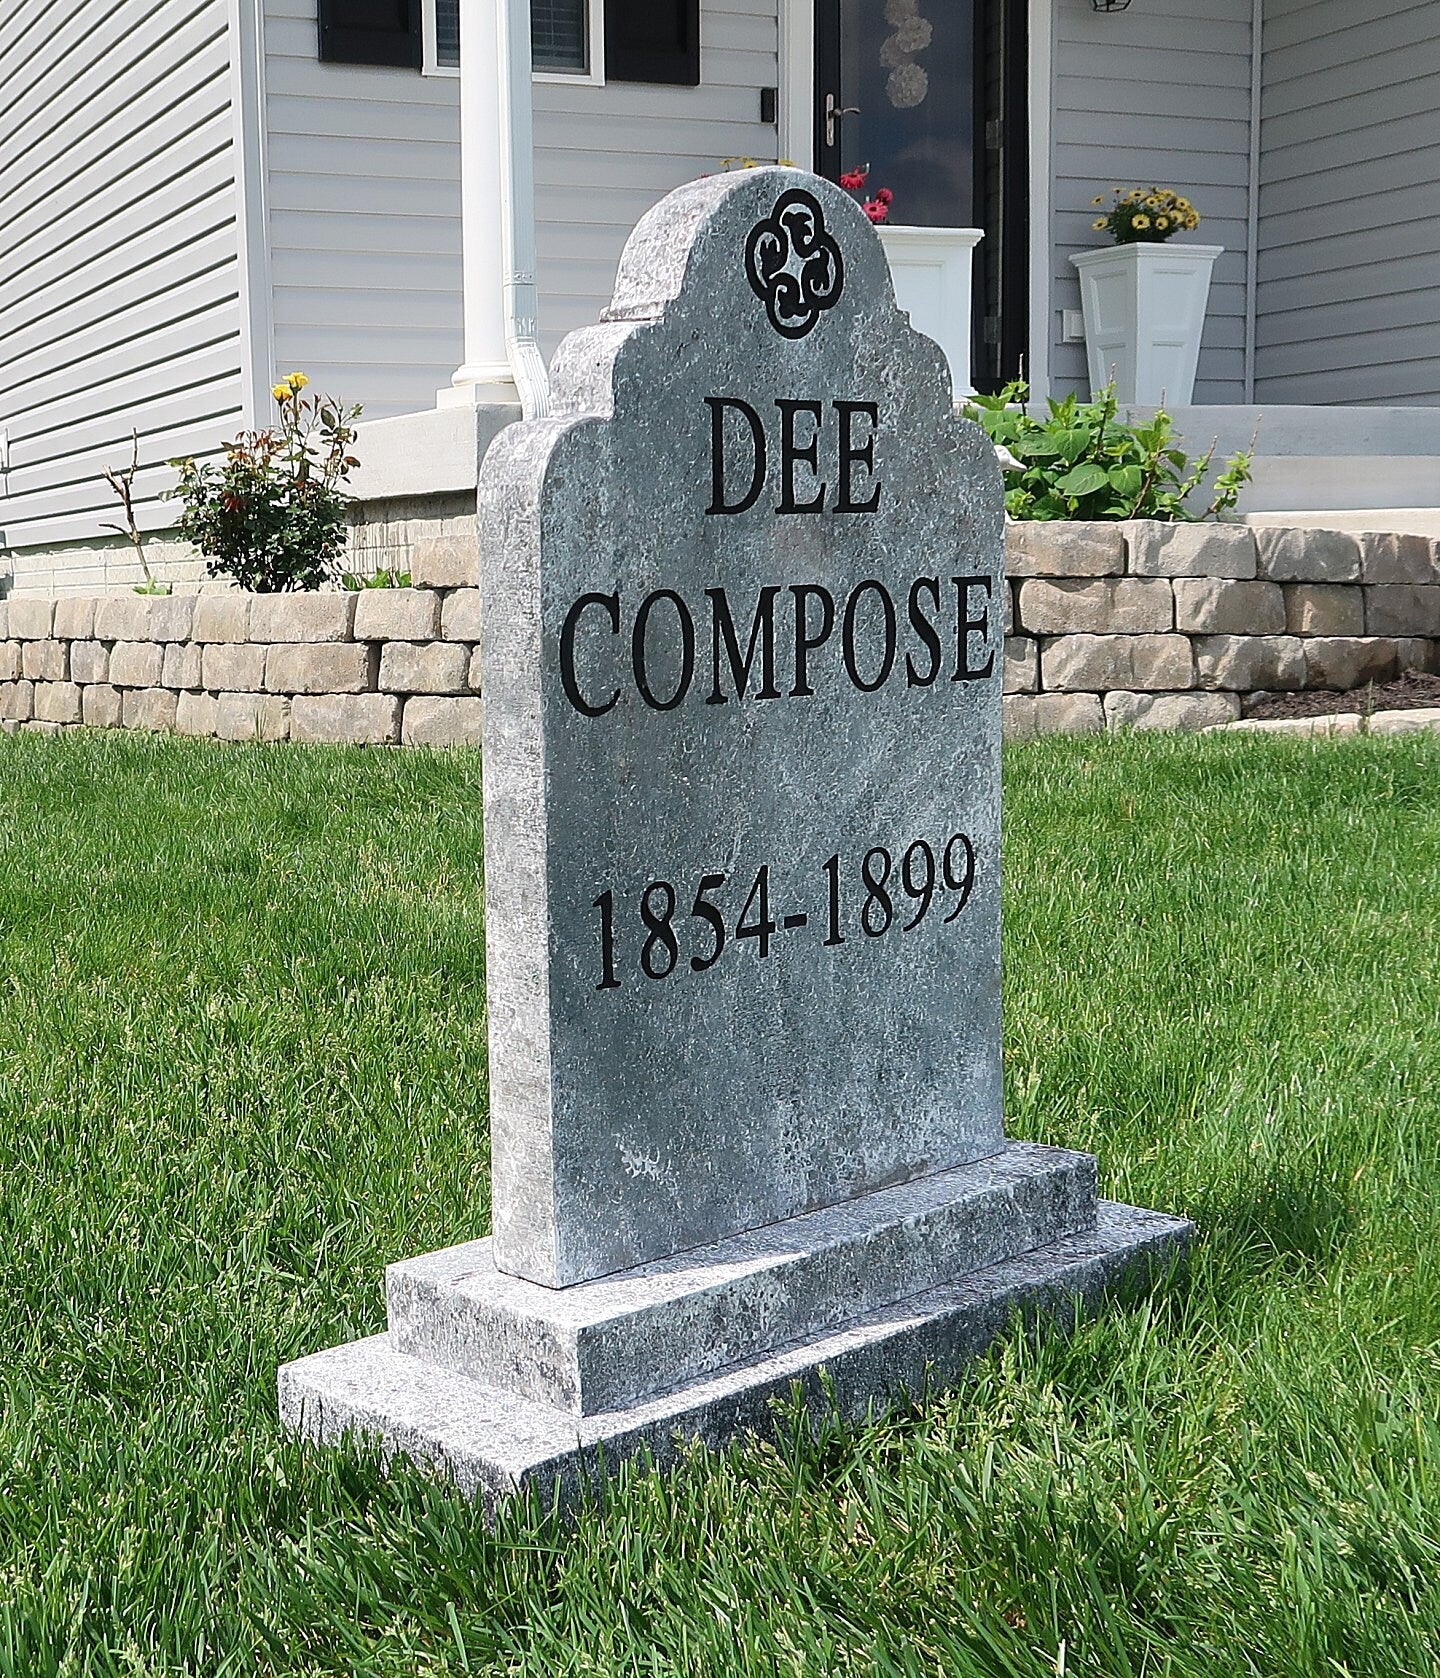 DEE COMPOSE Silly Clever Halloween Tombstone Yard Prop